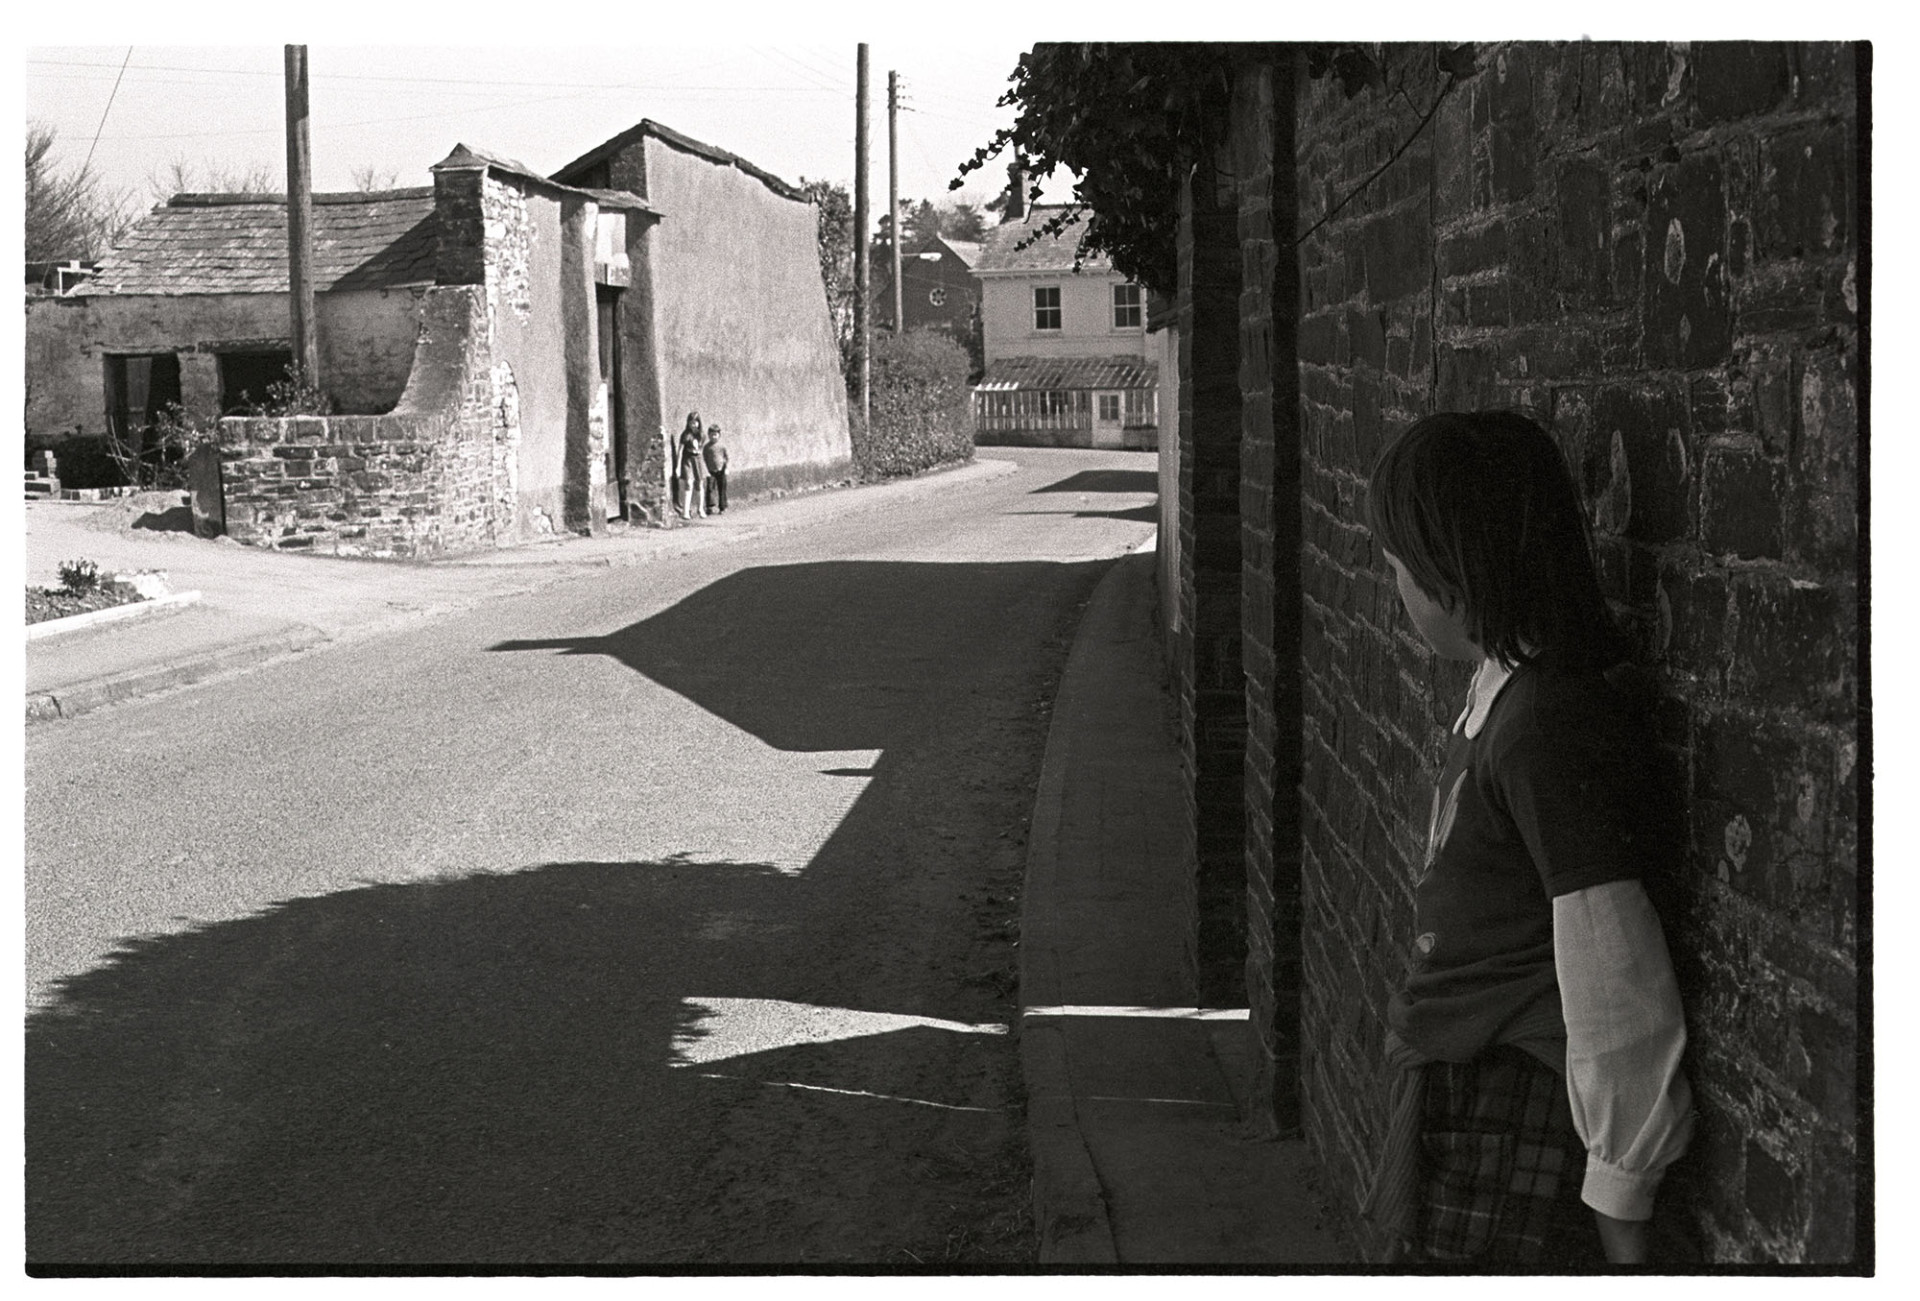 Village street with children. 
[Children playing in a street by a cob wall in Dolton. Shadows from buildings alongside the street and projected onto the road.]